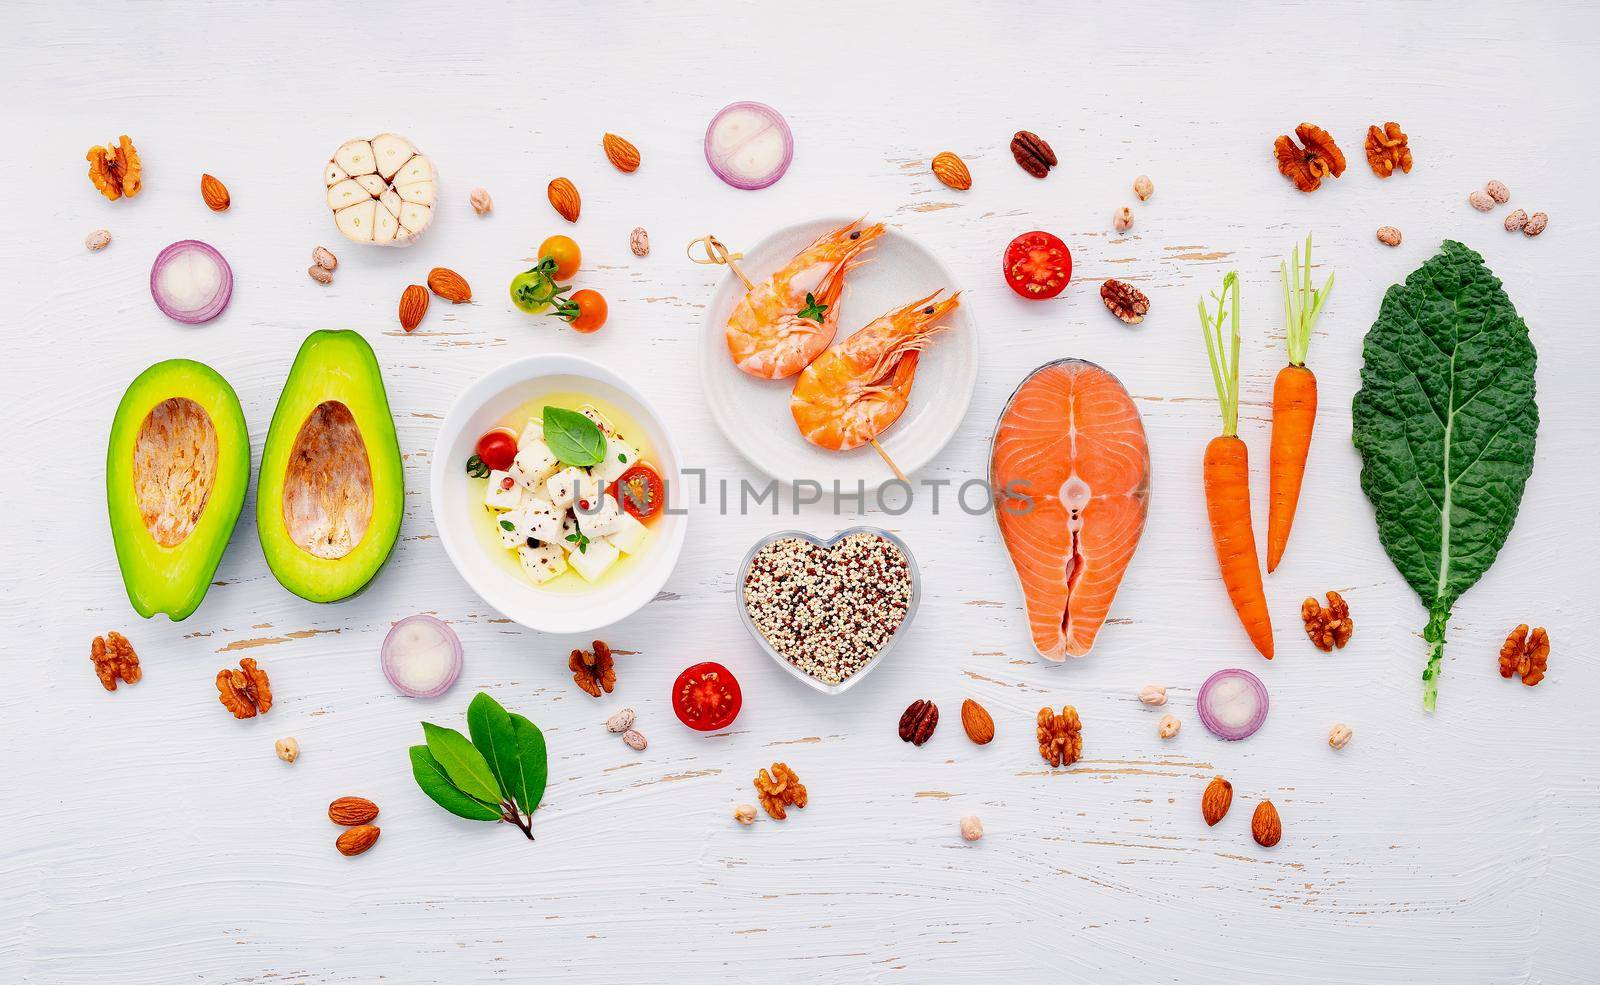 Ketogenic low carbs diet concept. Ingredients for healthy foods selection set up on white wooden background.